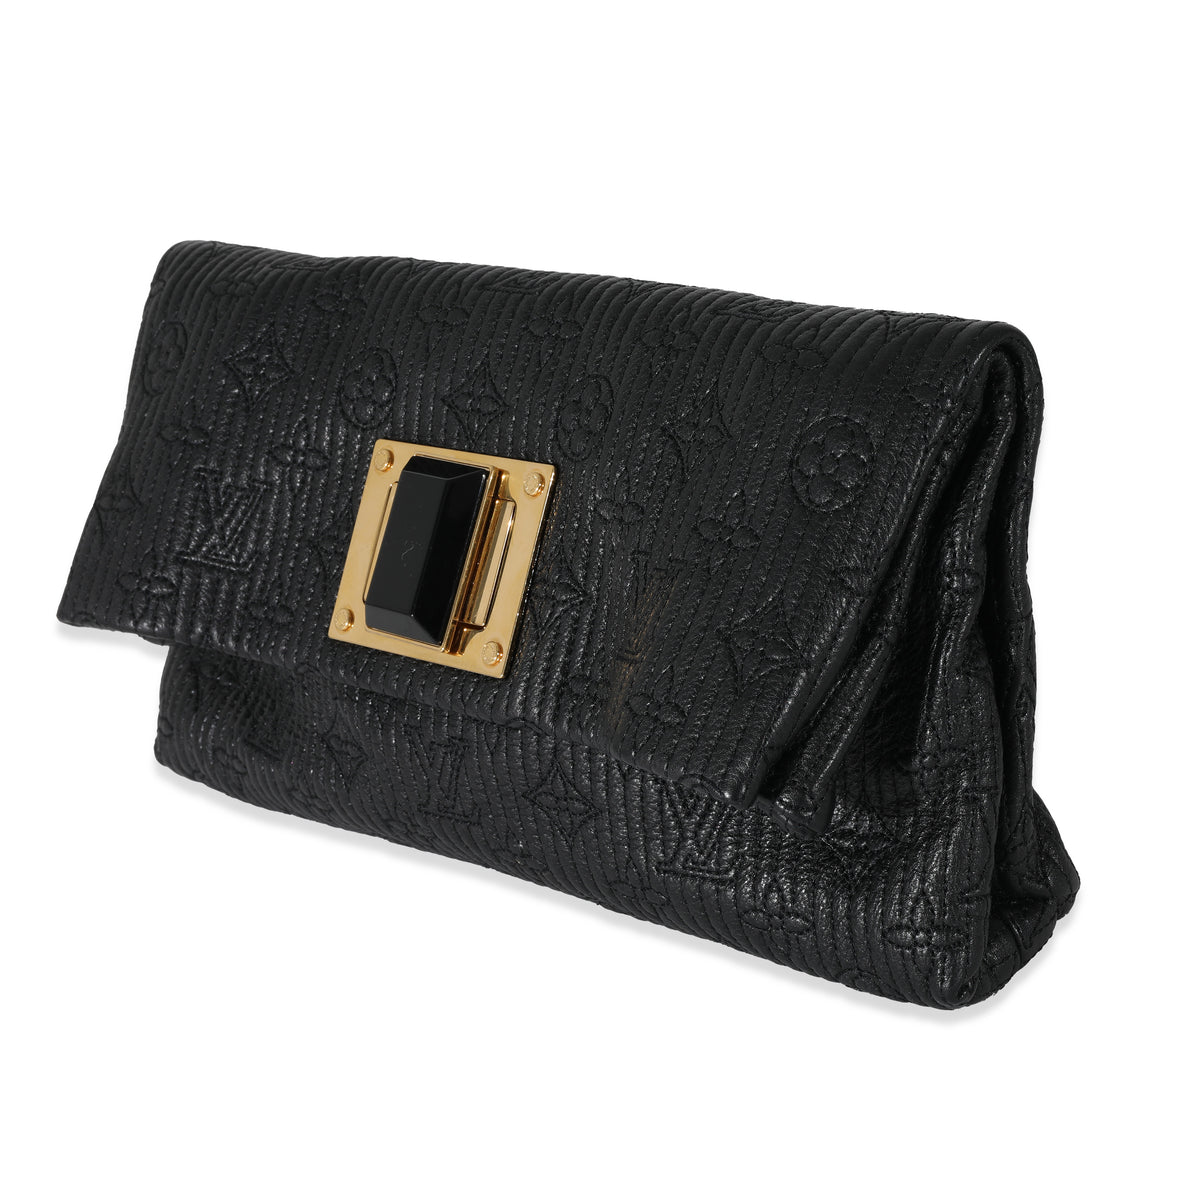 Louis Vuitton Black Leather Monogram Embroidered Limelight Altair Clutch